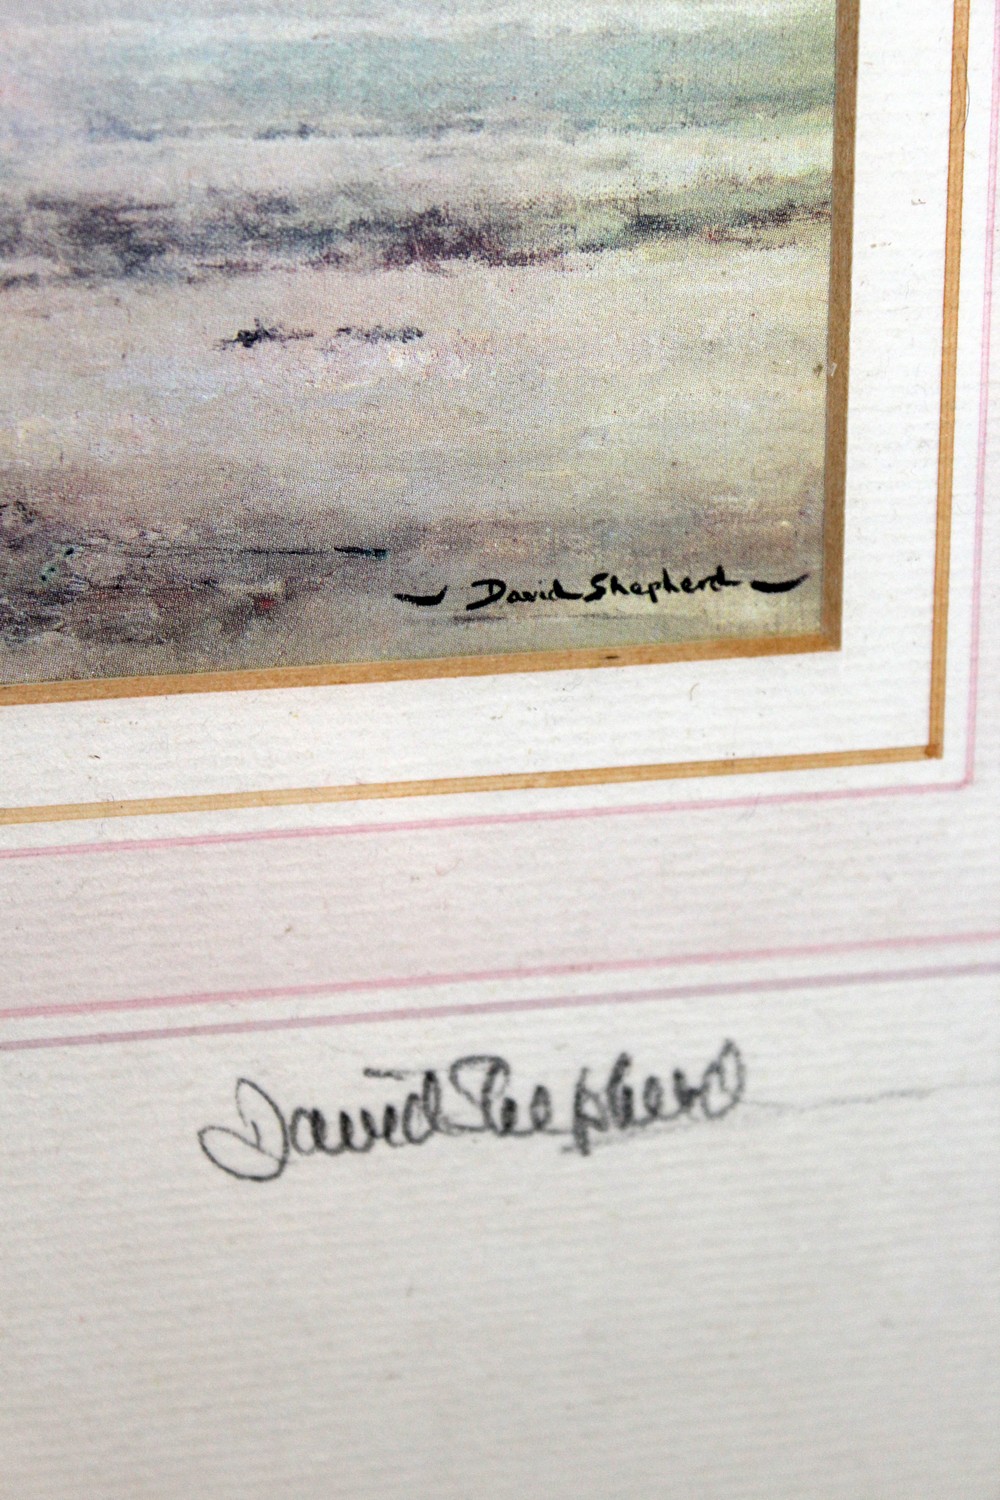 David Shepherd, a colour print of a rhinoceros, pencil signed. - Image 3 of 3